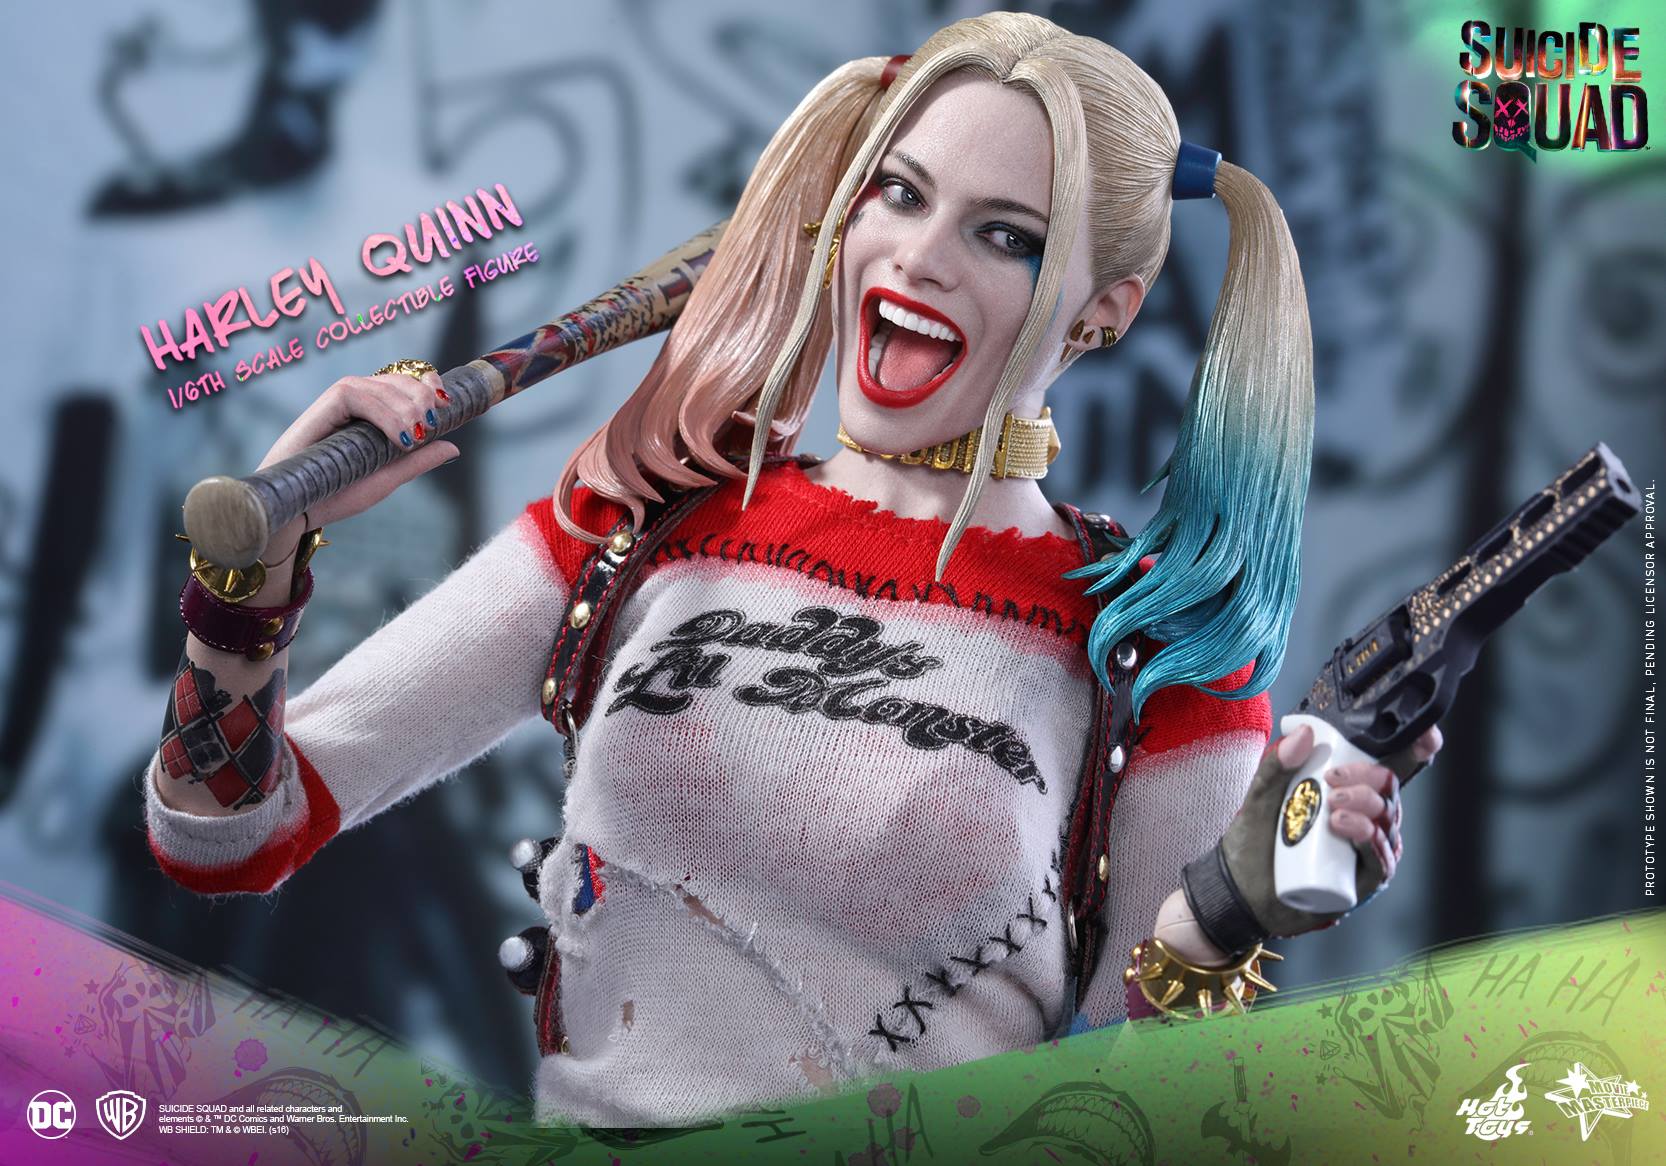 Hot-Toys-Suicide-Squad-Harley-Quinn-2